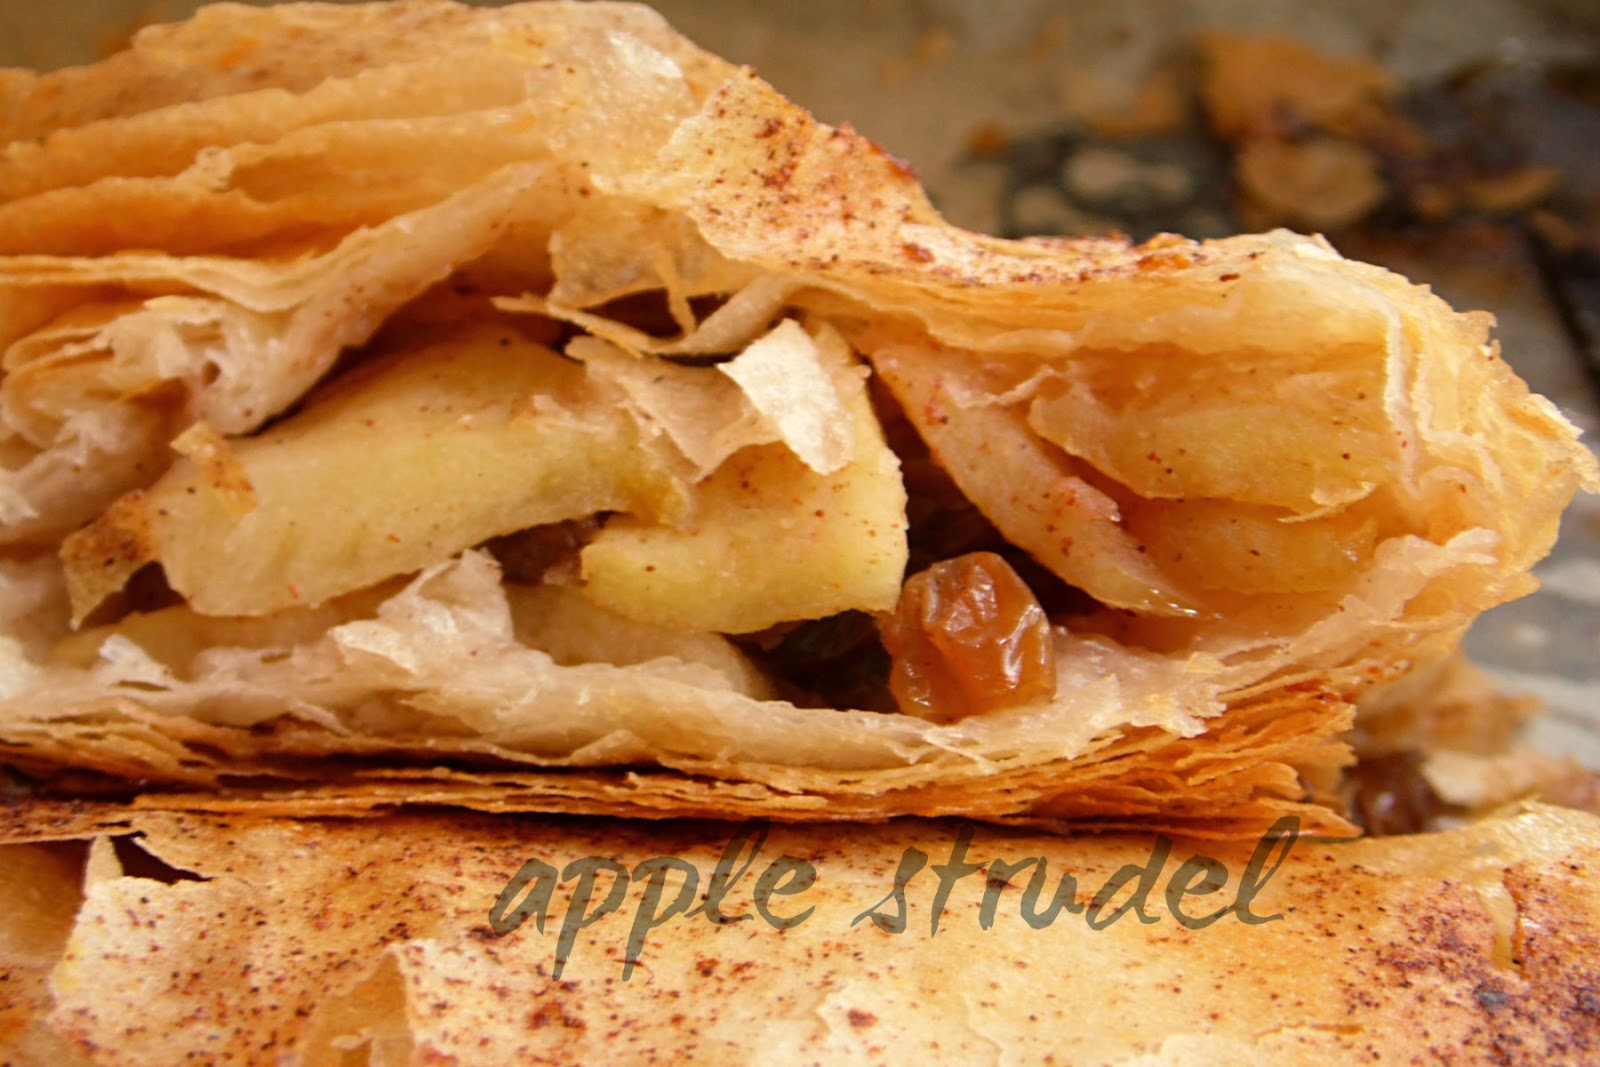 Cooking in Hungary: Easy Apple strudel using Phyllo (Filo) pastry